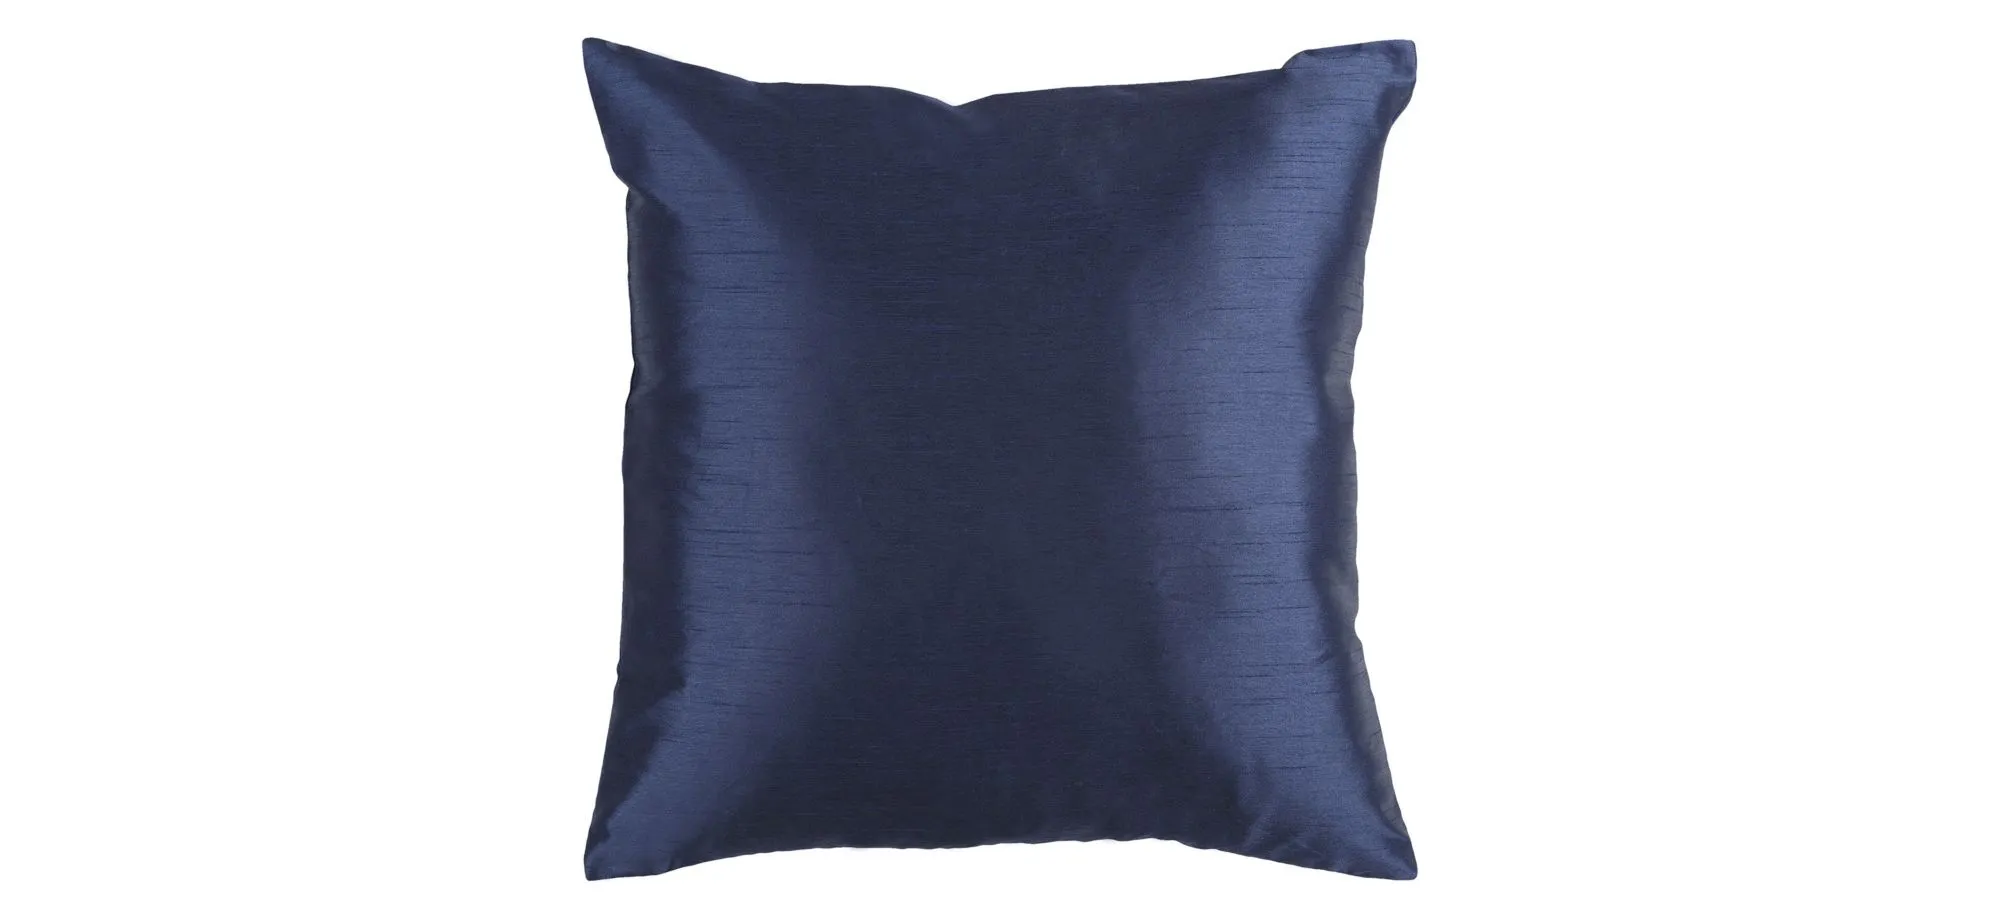 Solid Luxe 22" Throw Pillow in Navy by Surya